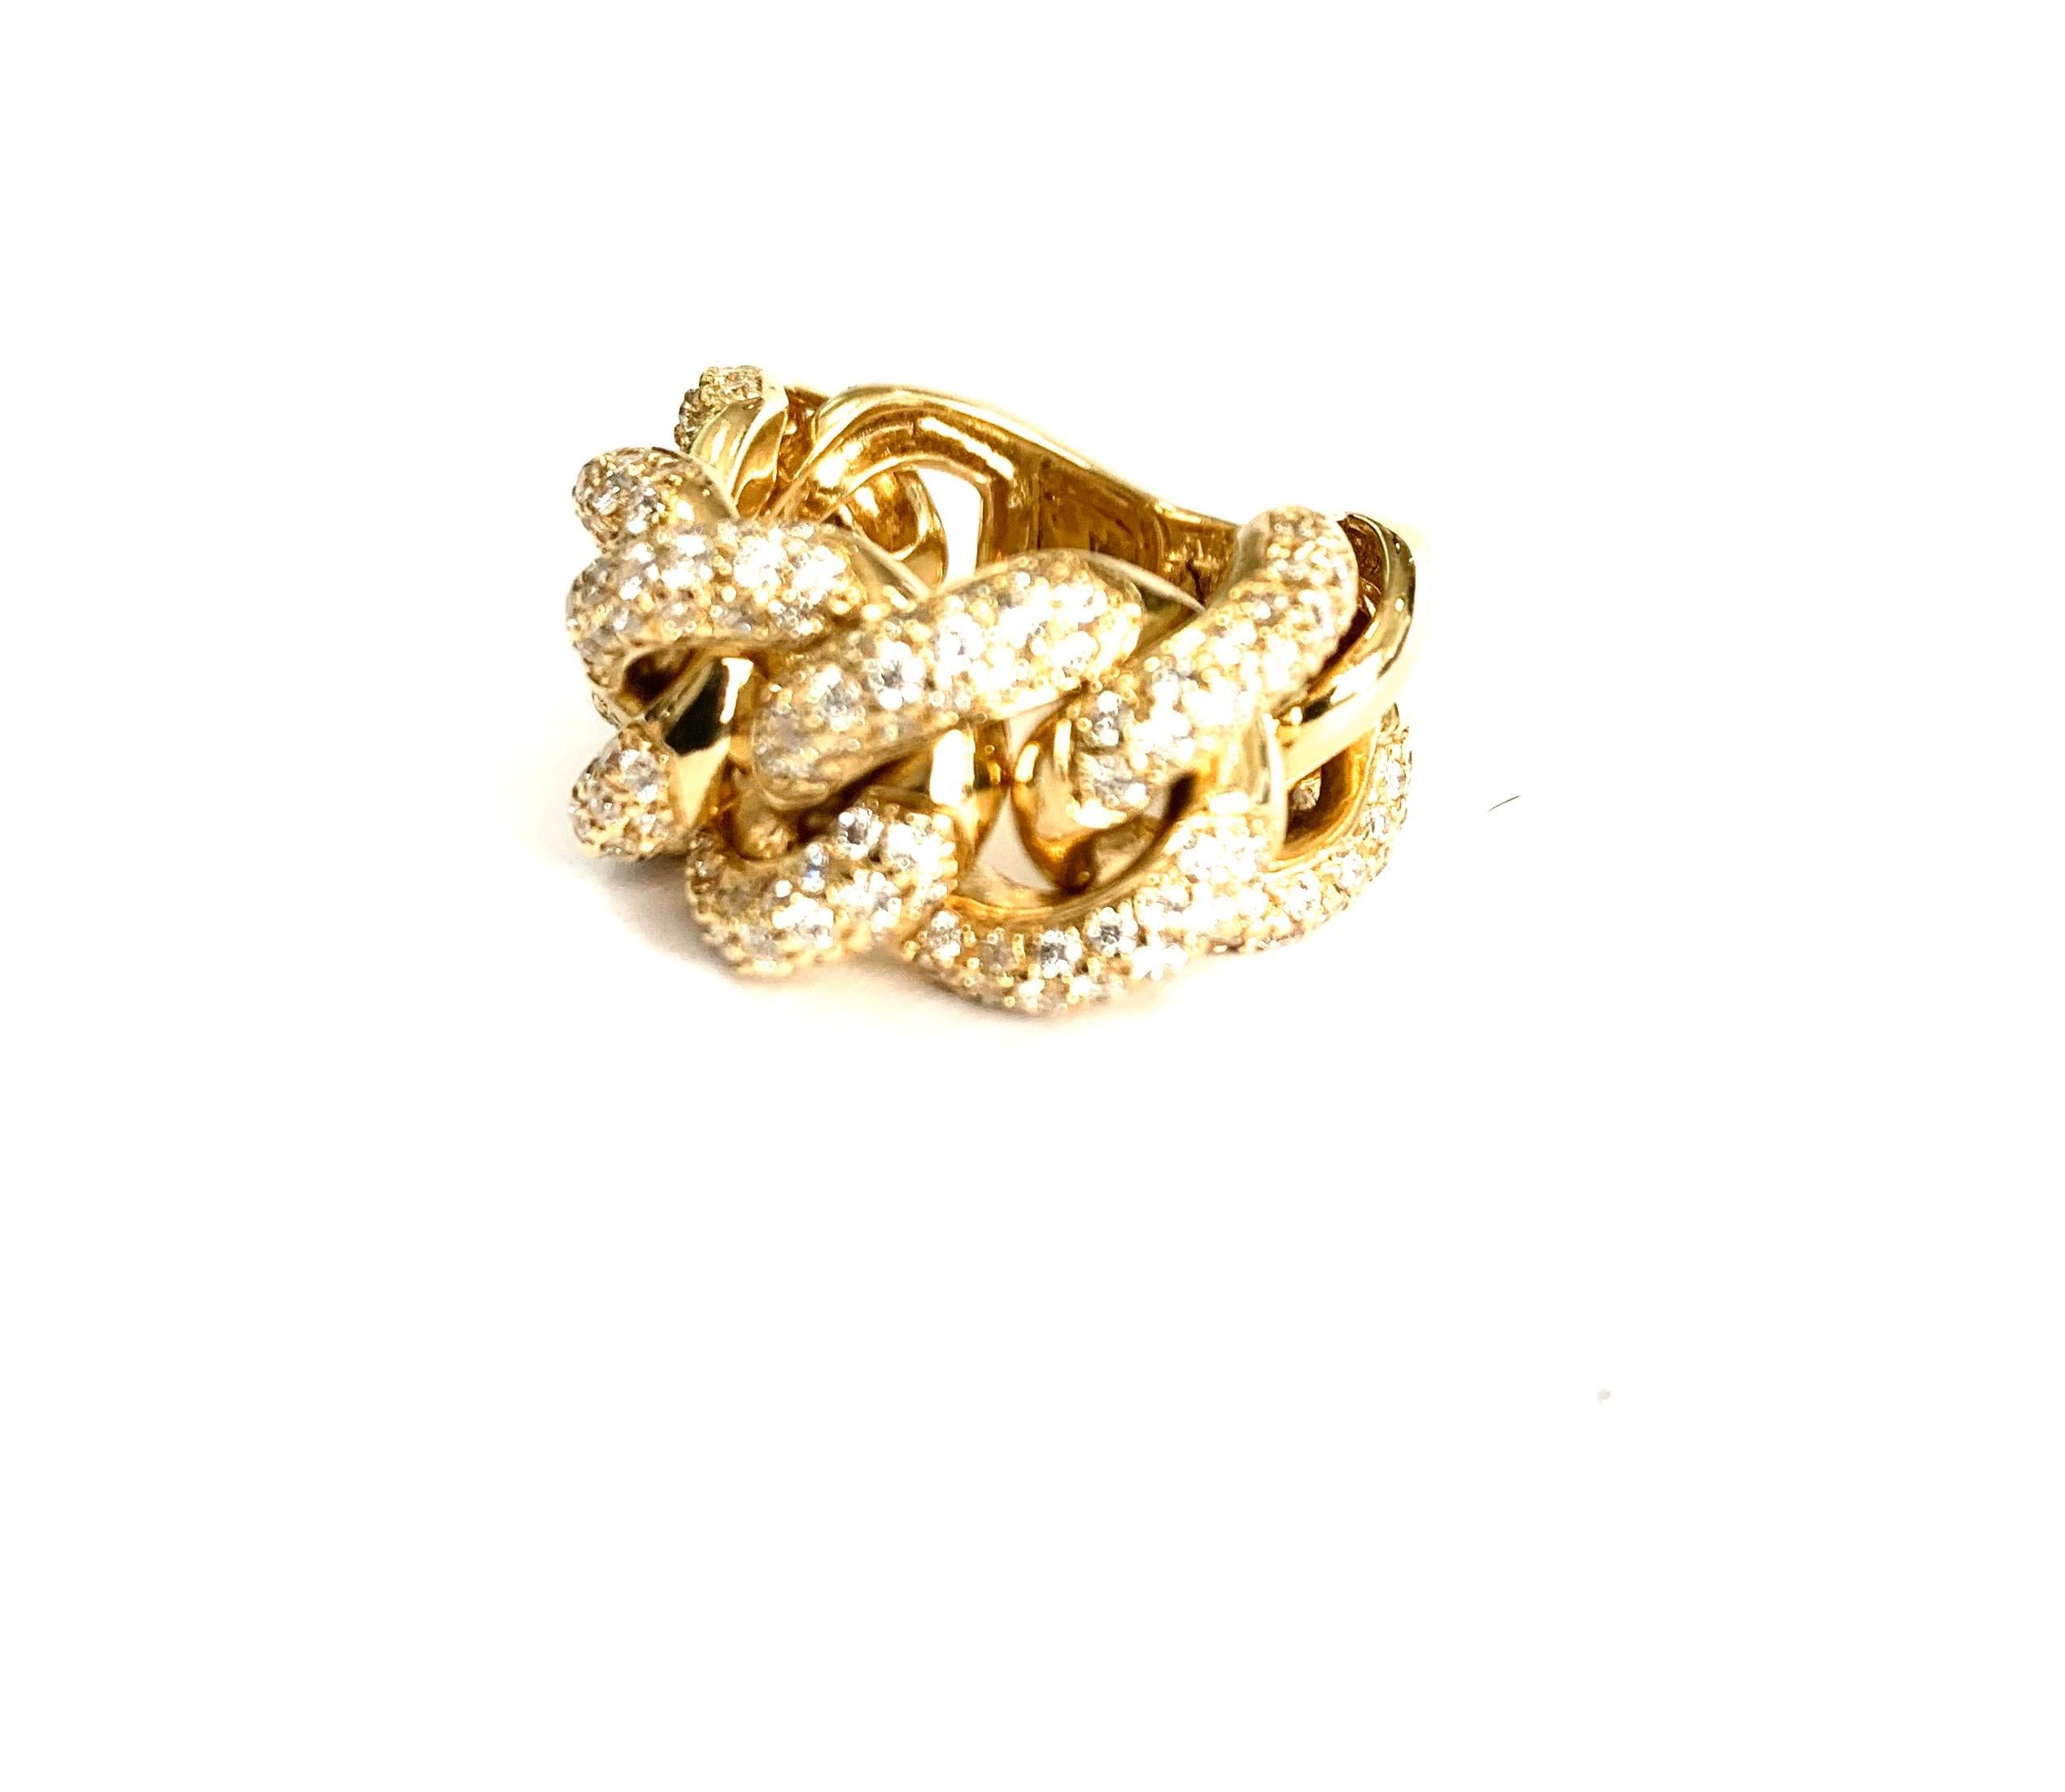 Cuban solid yellow gold ring hand made in Italy

weight of gold gr 17
white diamond clarity g quality vvs1 ct 1.59